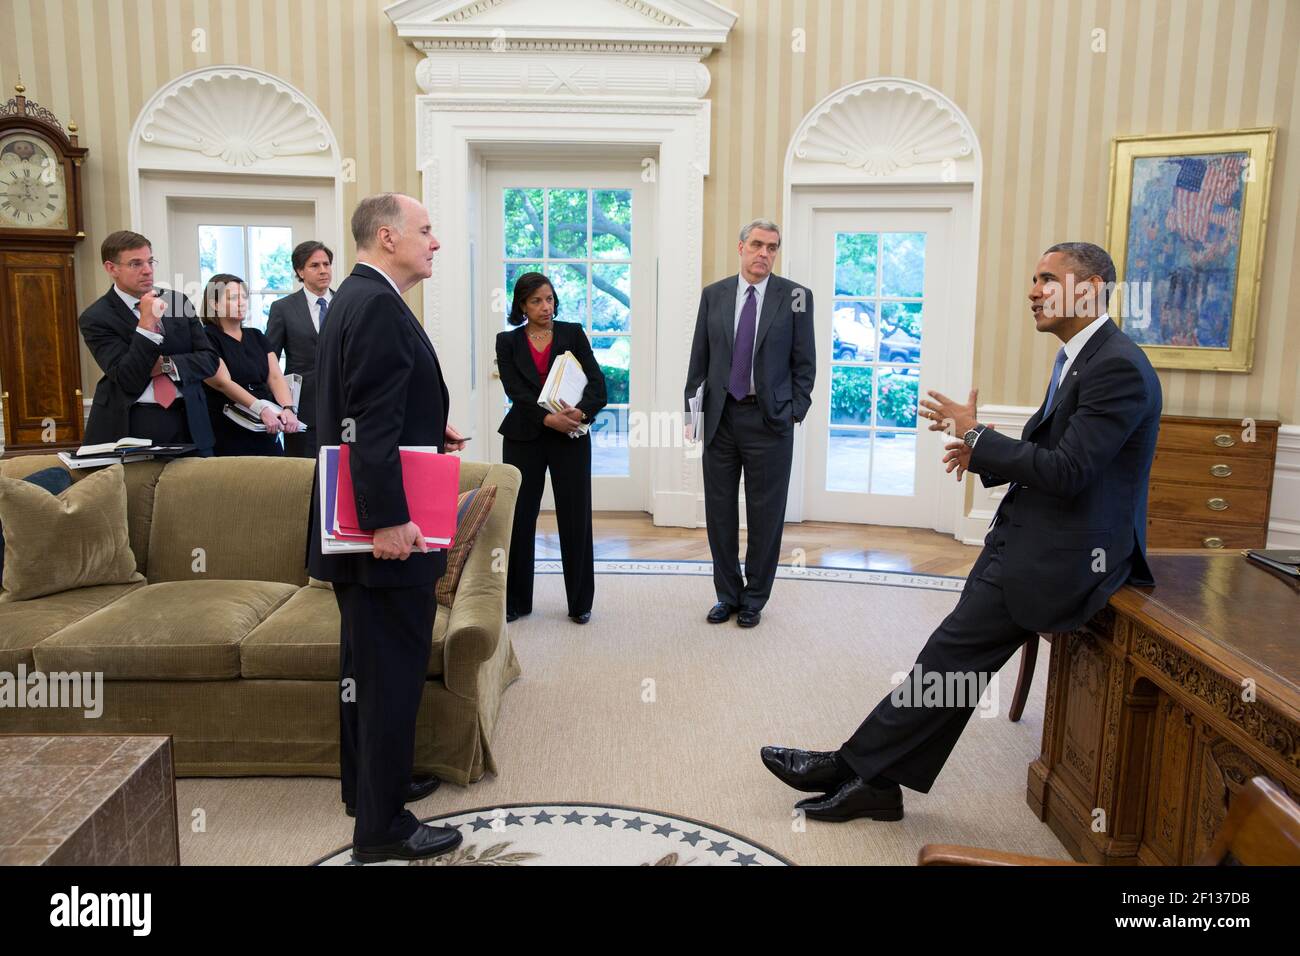 President Barack Obama talks with advisors in the Oval Office June 25 2013. Pictured from left are: Jeff Eggers Senior Director for Afghanistan and Pakistan; Lisa Monaco Assistant to the President for Homeland Security and Counterterrorism; Tony Blinken Deputy National Security Advisor; National Security Advisor Tom Donilon; Amb. Susan Rice the incoming National Security Advisor; and Doug Lute Deputy Assistant to the President and Coordinator for South Asia. Stock Photo